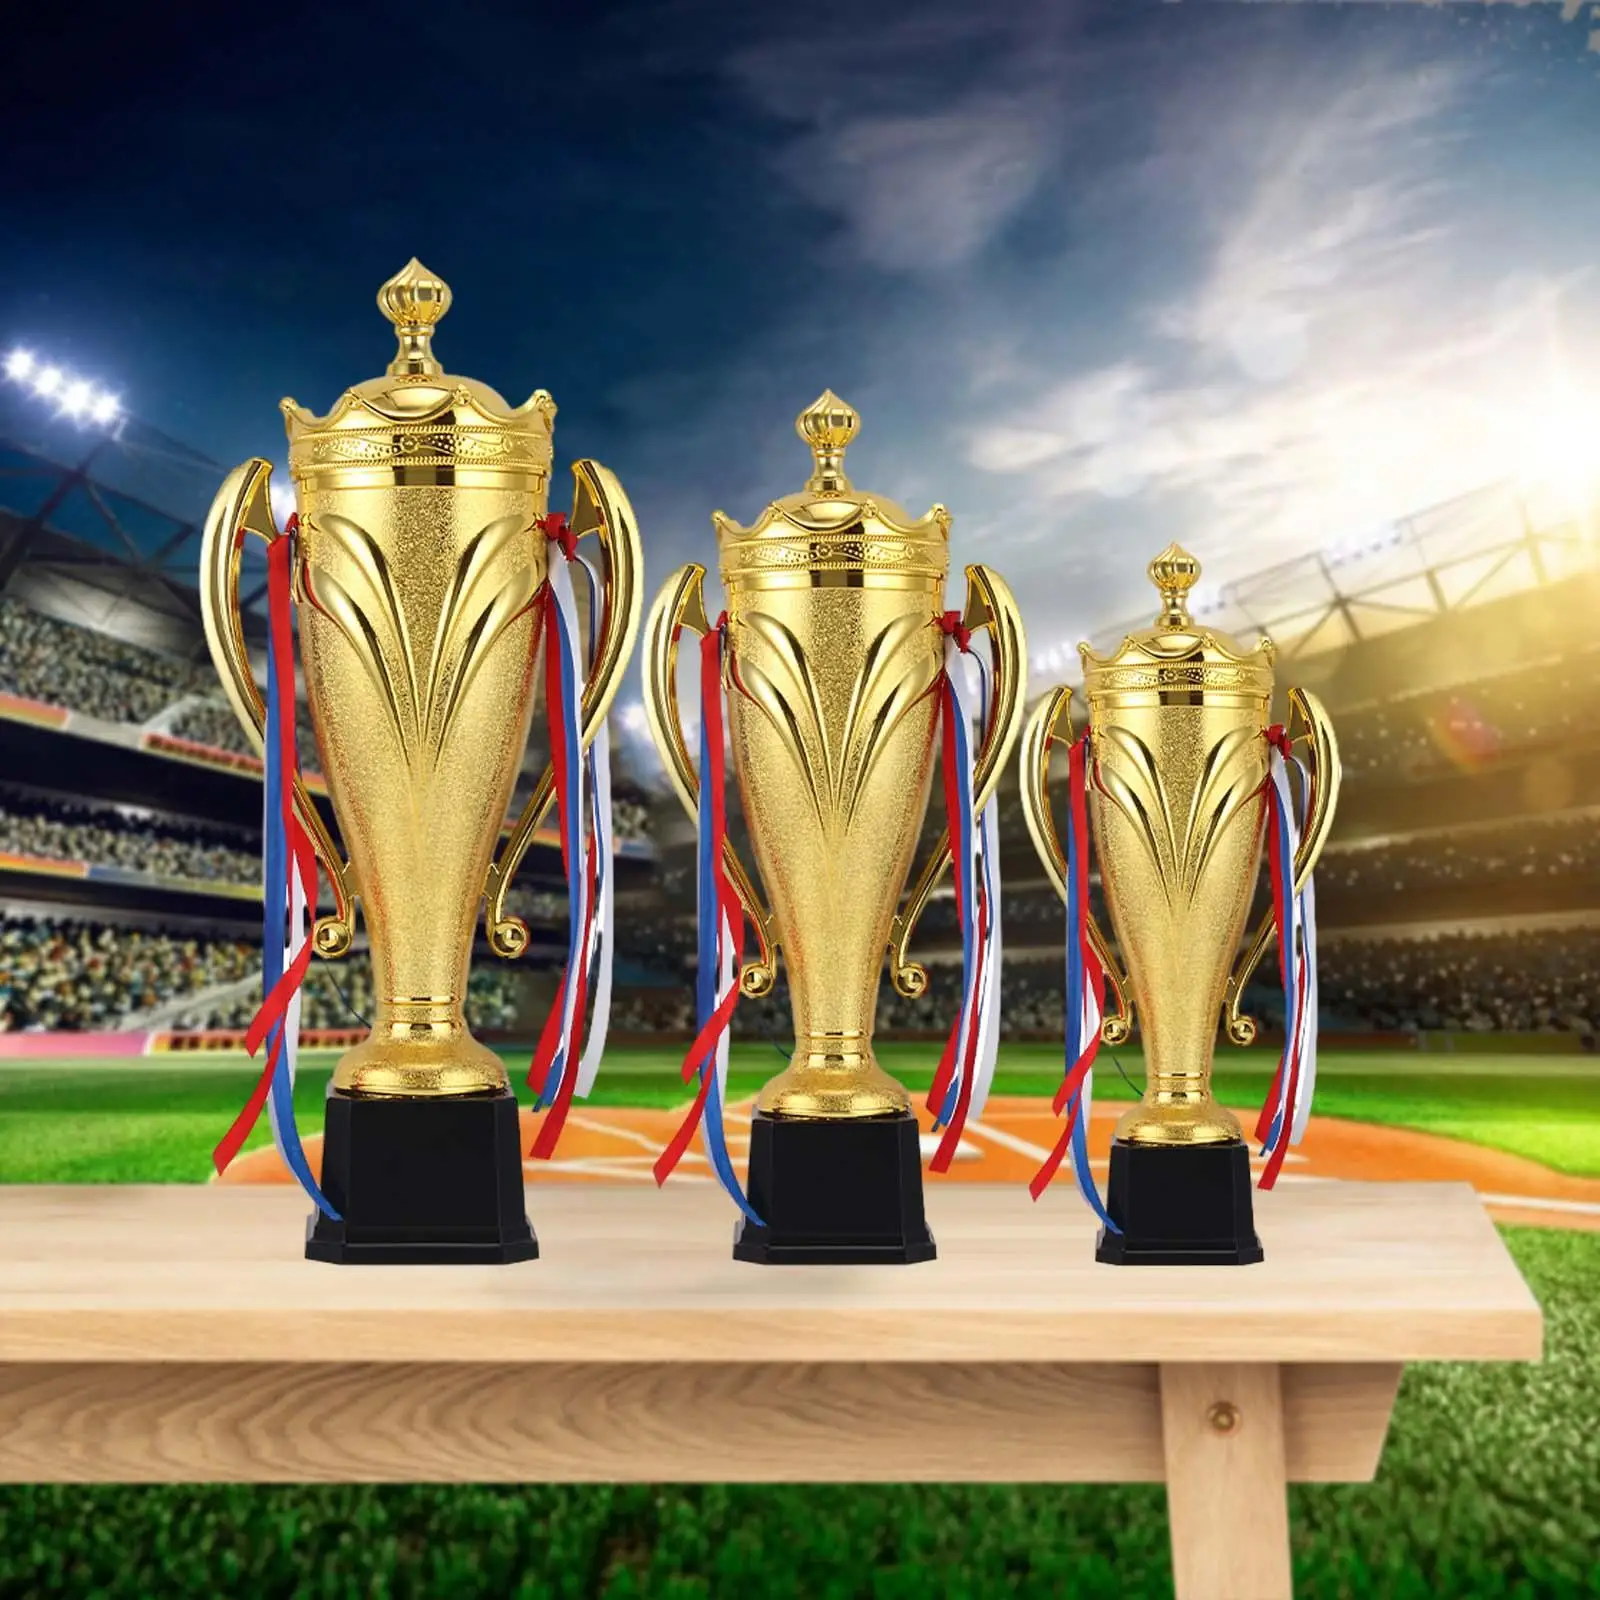 Child Trophy Cups PP Award Trophies Cup Versatile Smooth Surface Decorative Winning Prizes for Children Competitions